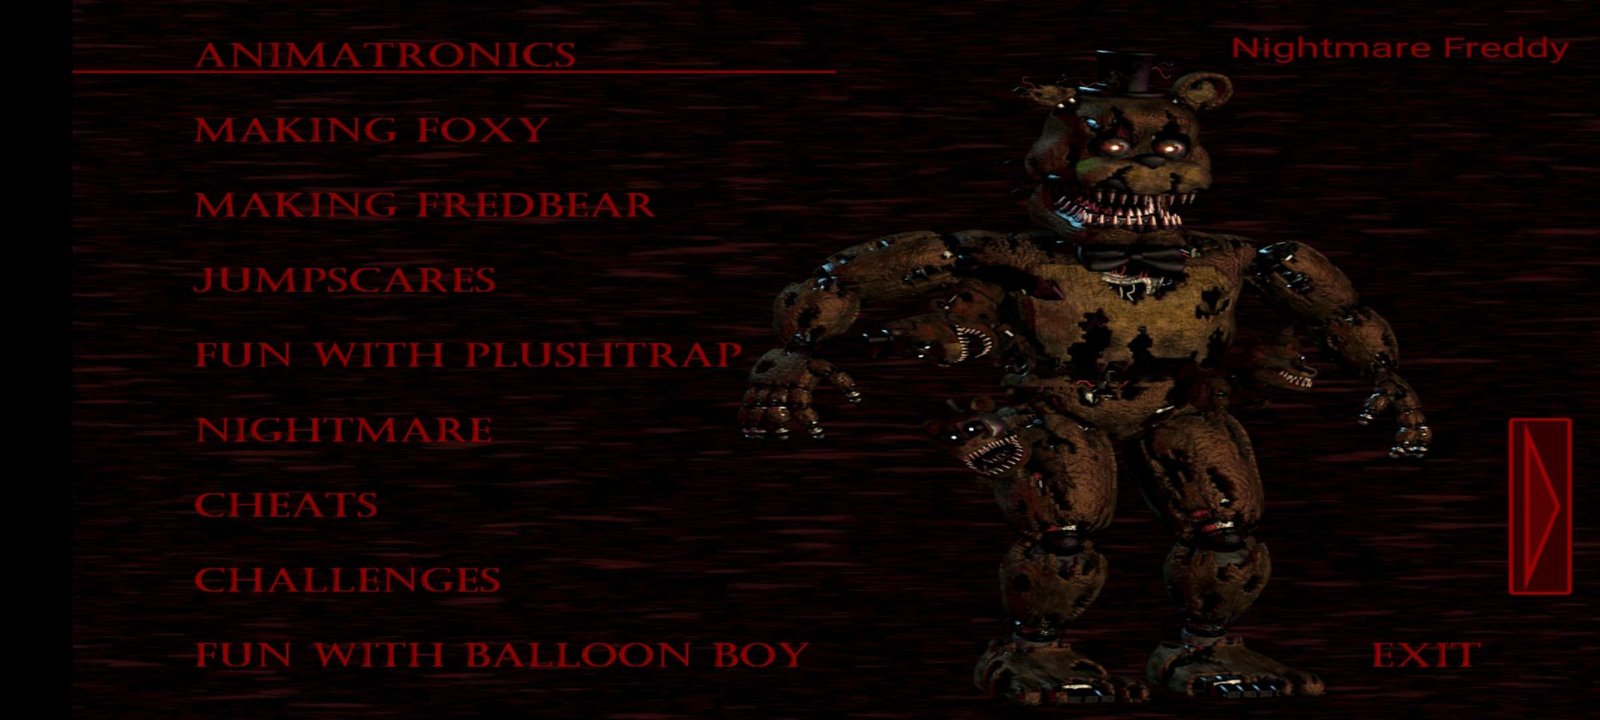 Download Five Nights at Freddy's 4 (MOD, unlocked) 1.1 for Android